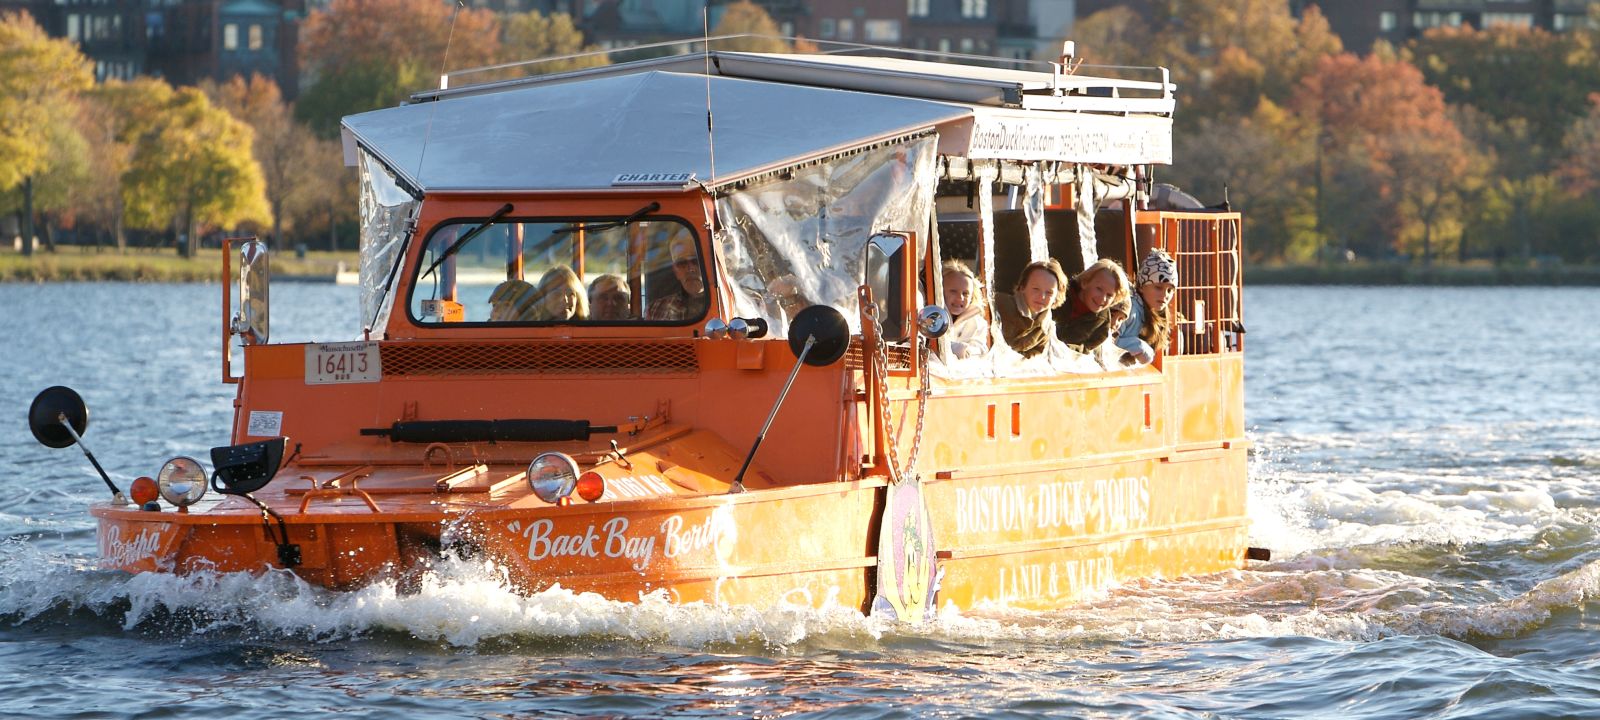 Duck Tour Boat in the water, a Boston Attraction near The Colonnade Hotel